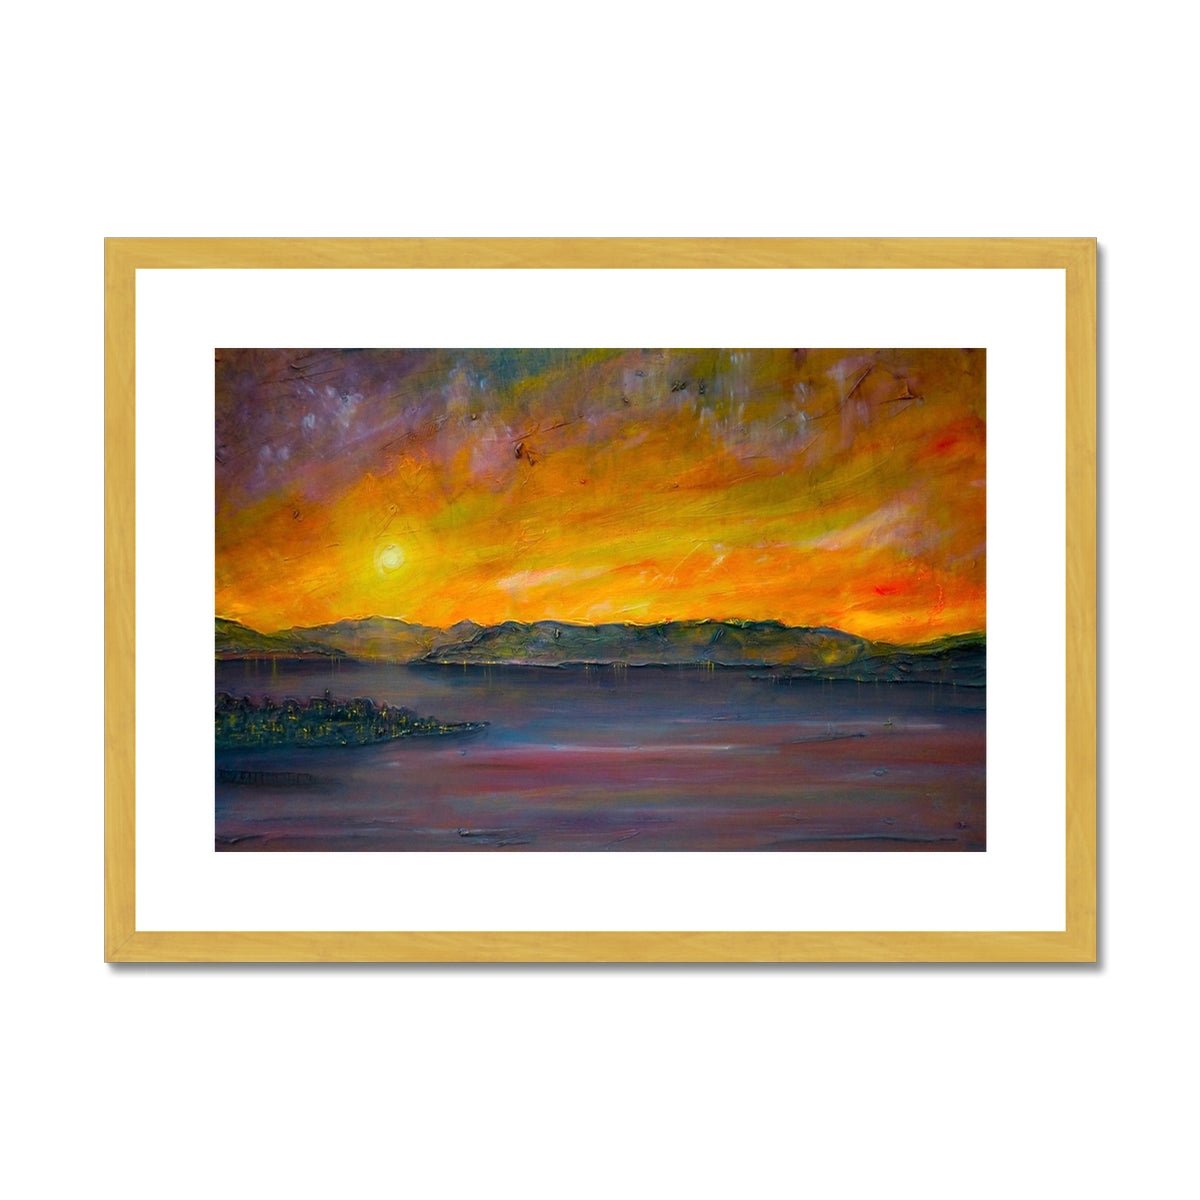 Sunset Over Gourock Painting | Antique Framed & Mounted Prints From Scotland-Antique Framed & Mounted Prints-River Clyde Art Gallery-A2 Landscape-Gold Frame-Paintings, Prints, Homeware, Art Gifts From Scotland By Scottish Artist Kevin Hunter